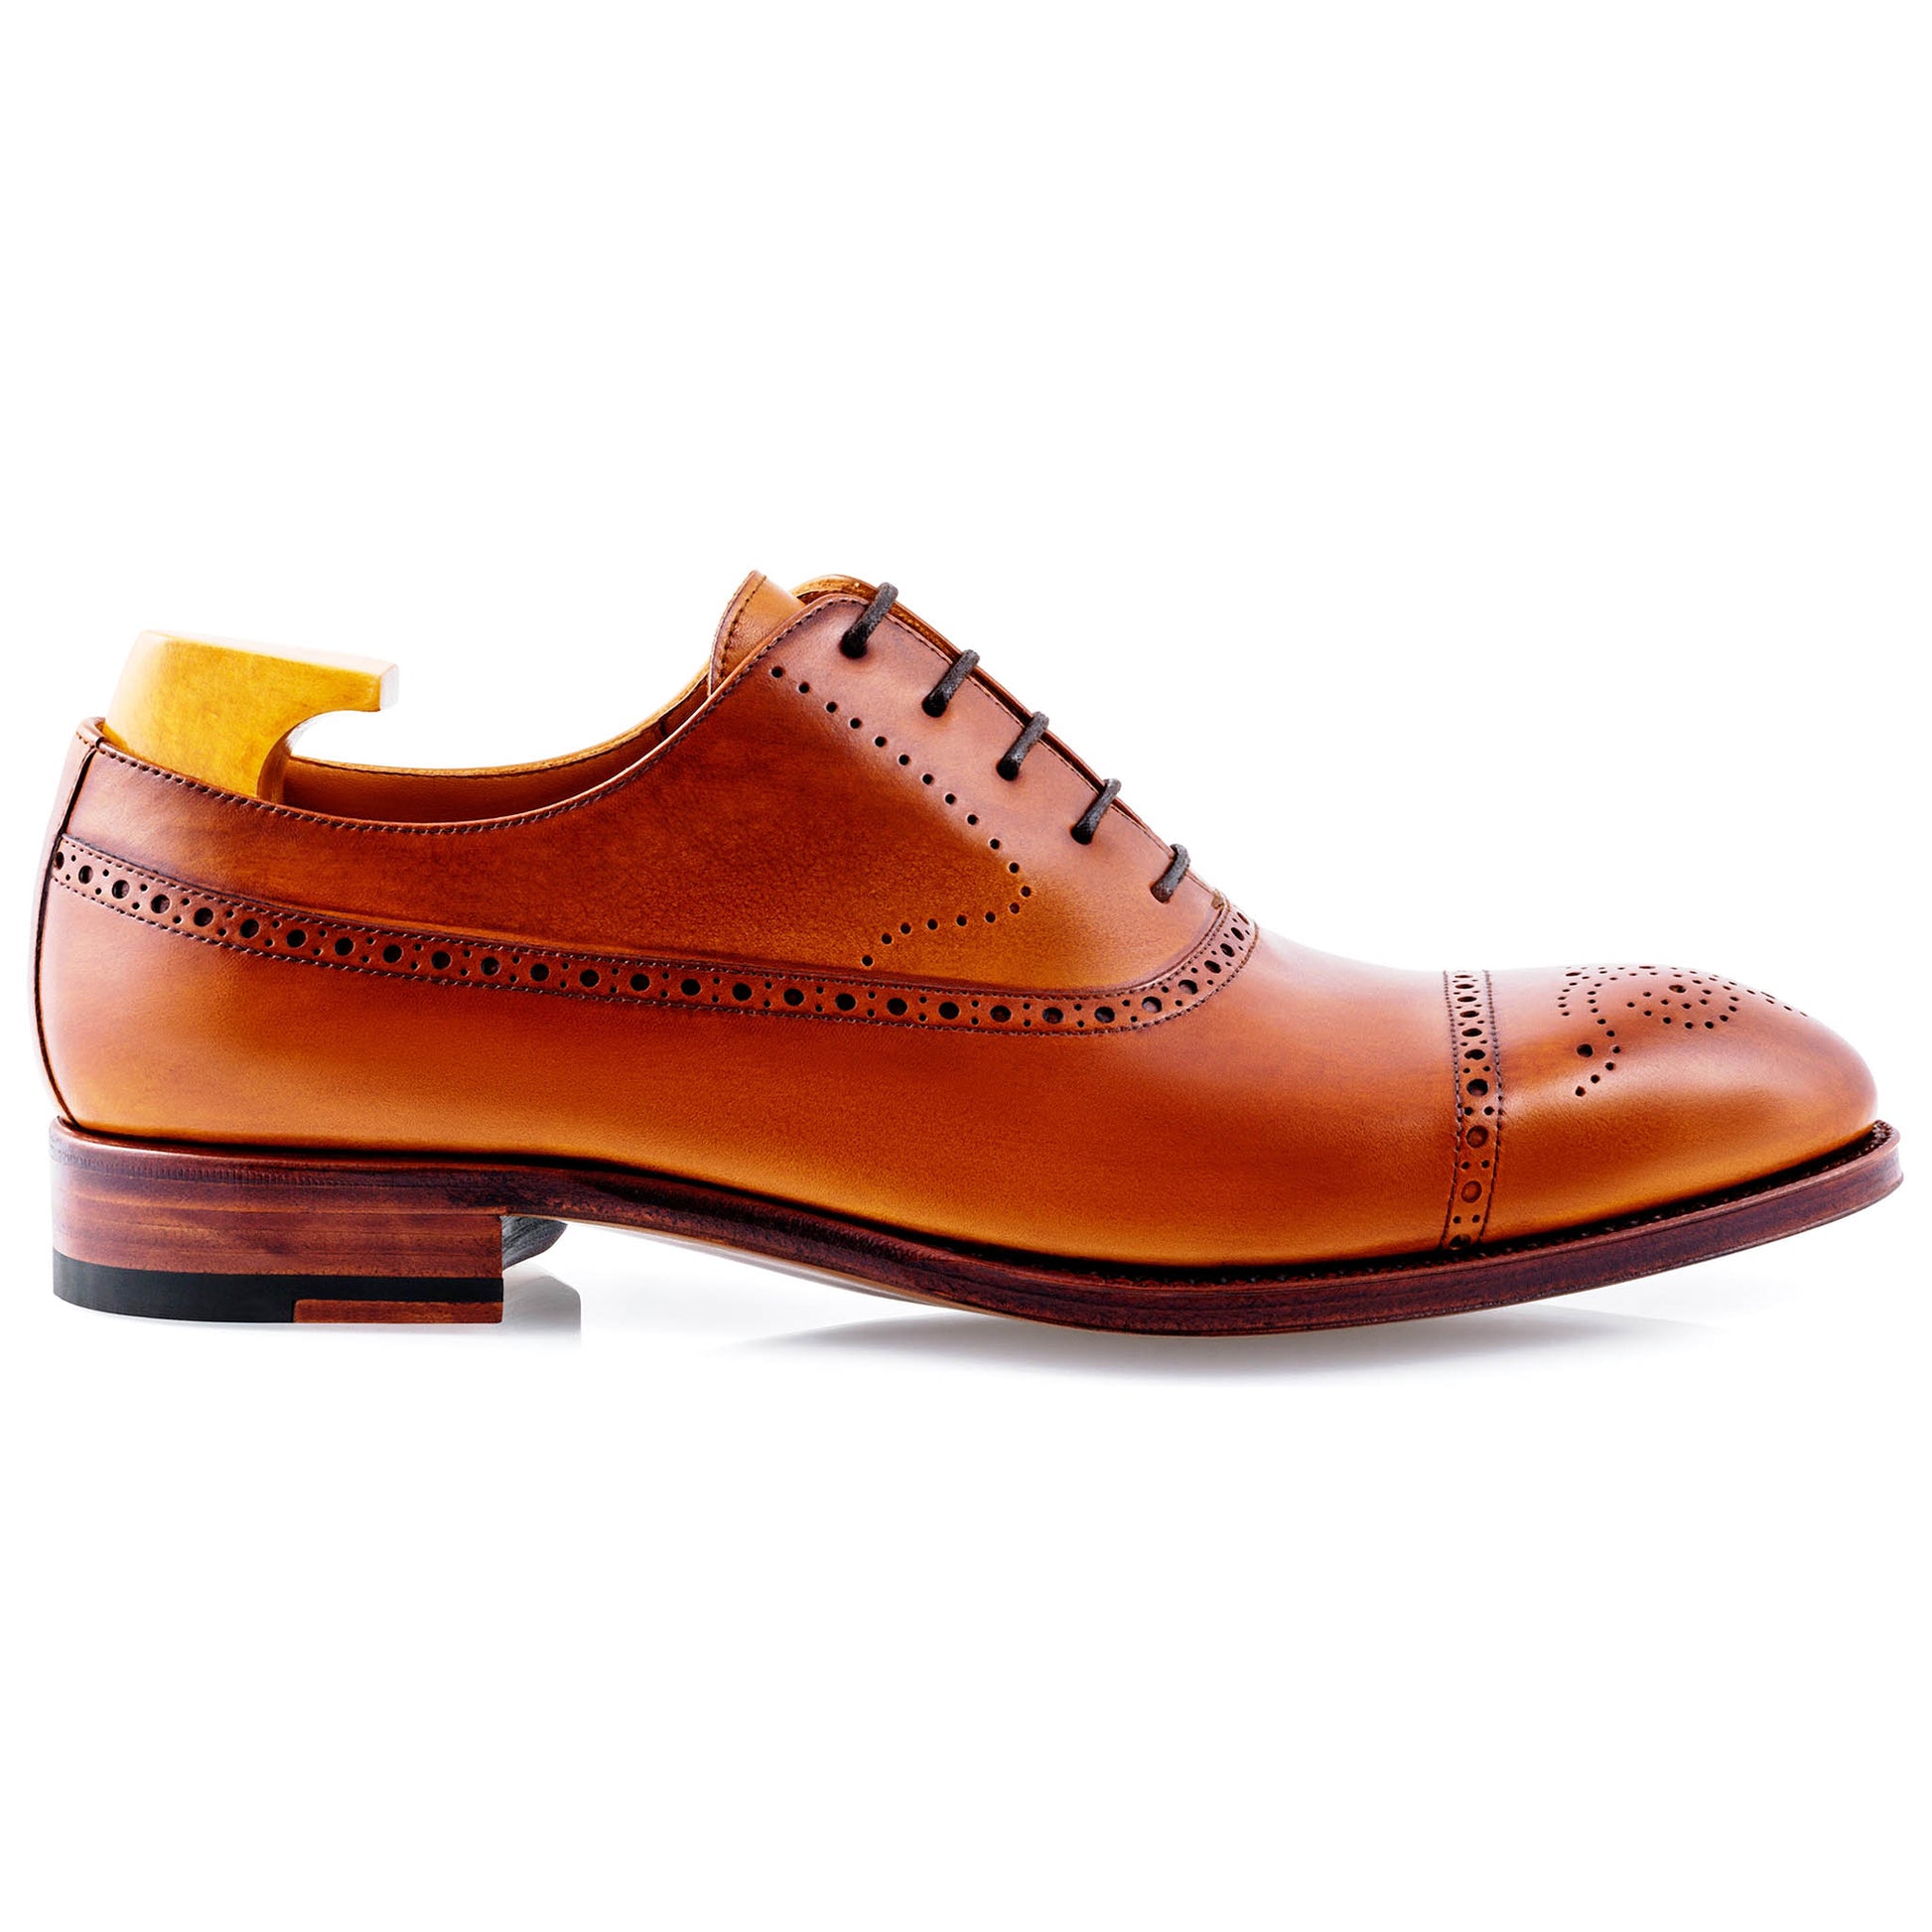 TLB Mallorca leather shoes TAYLOR